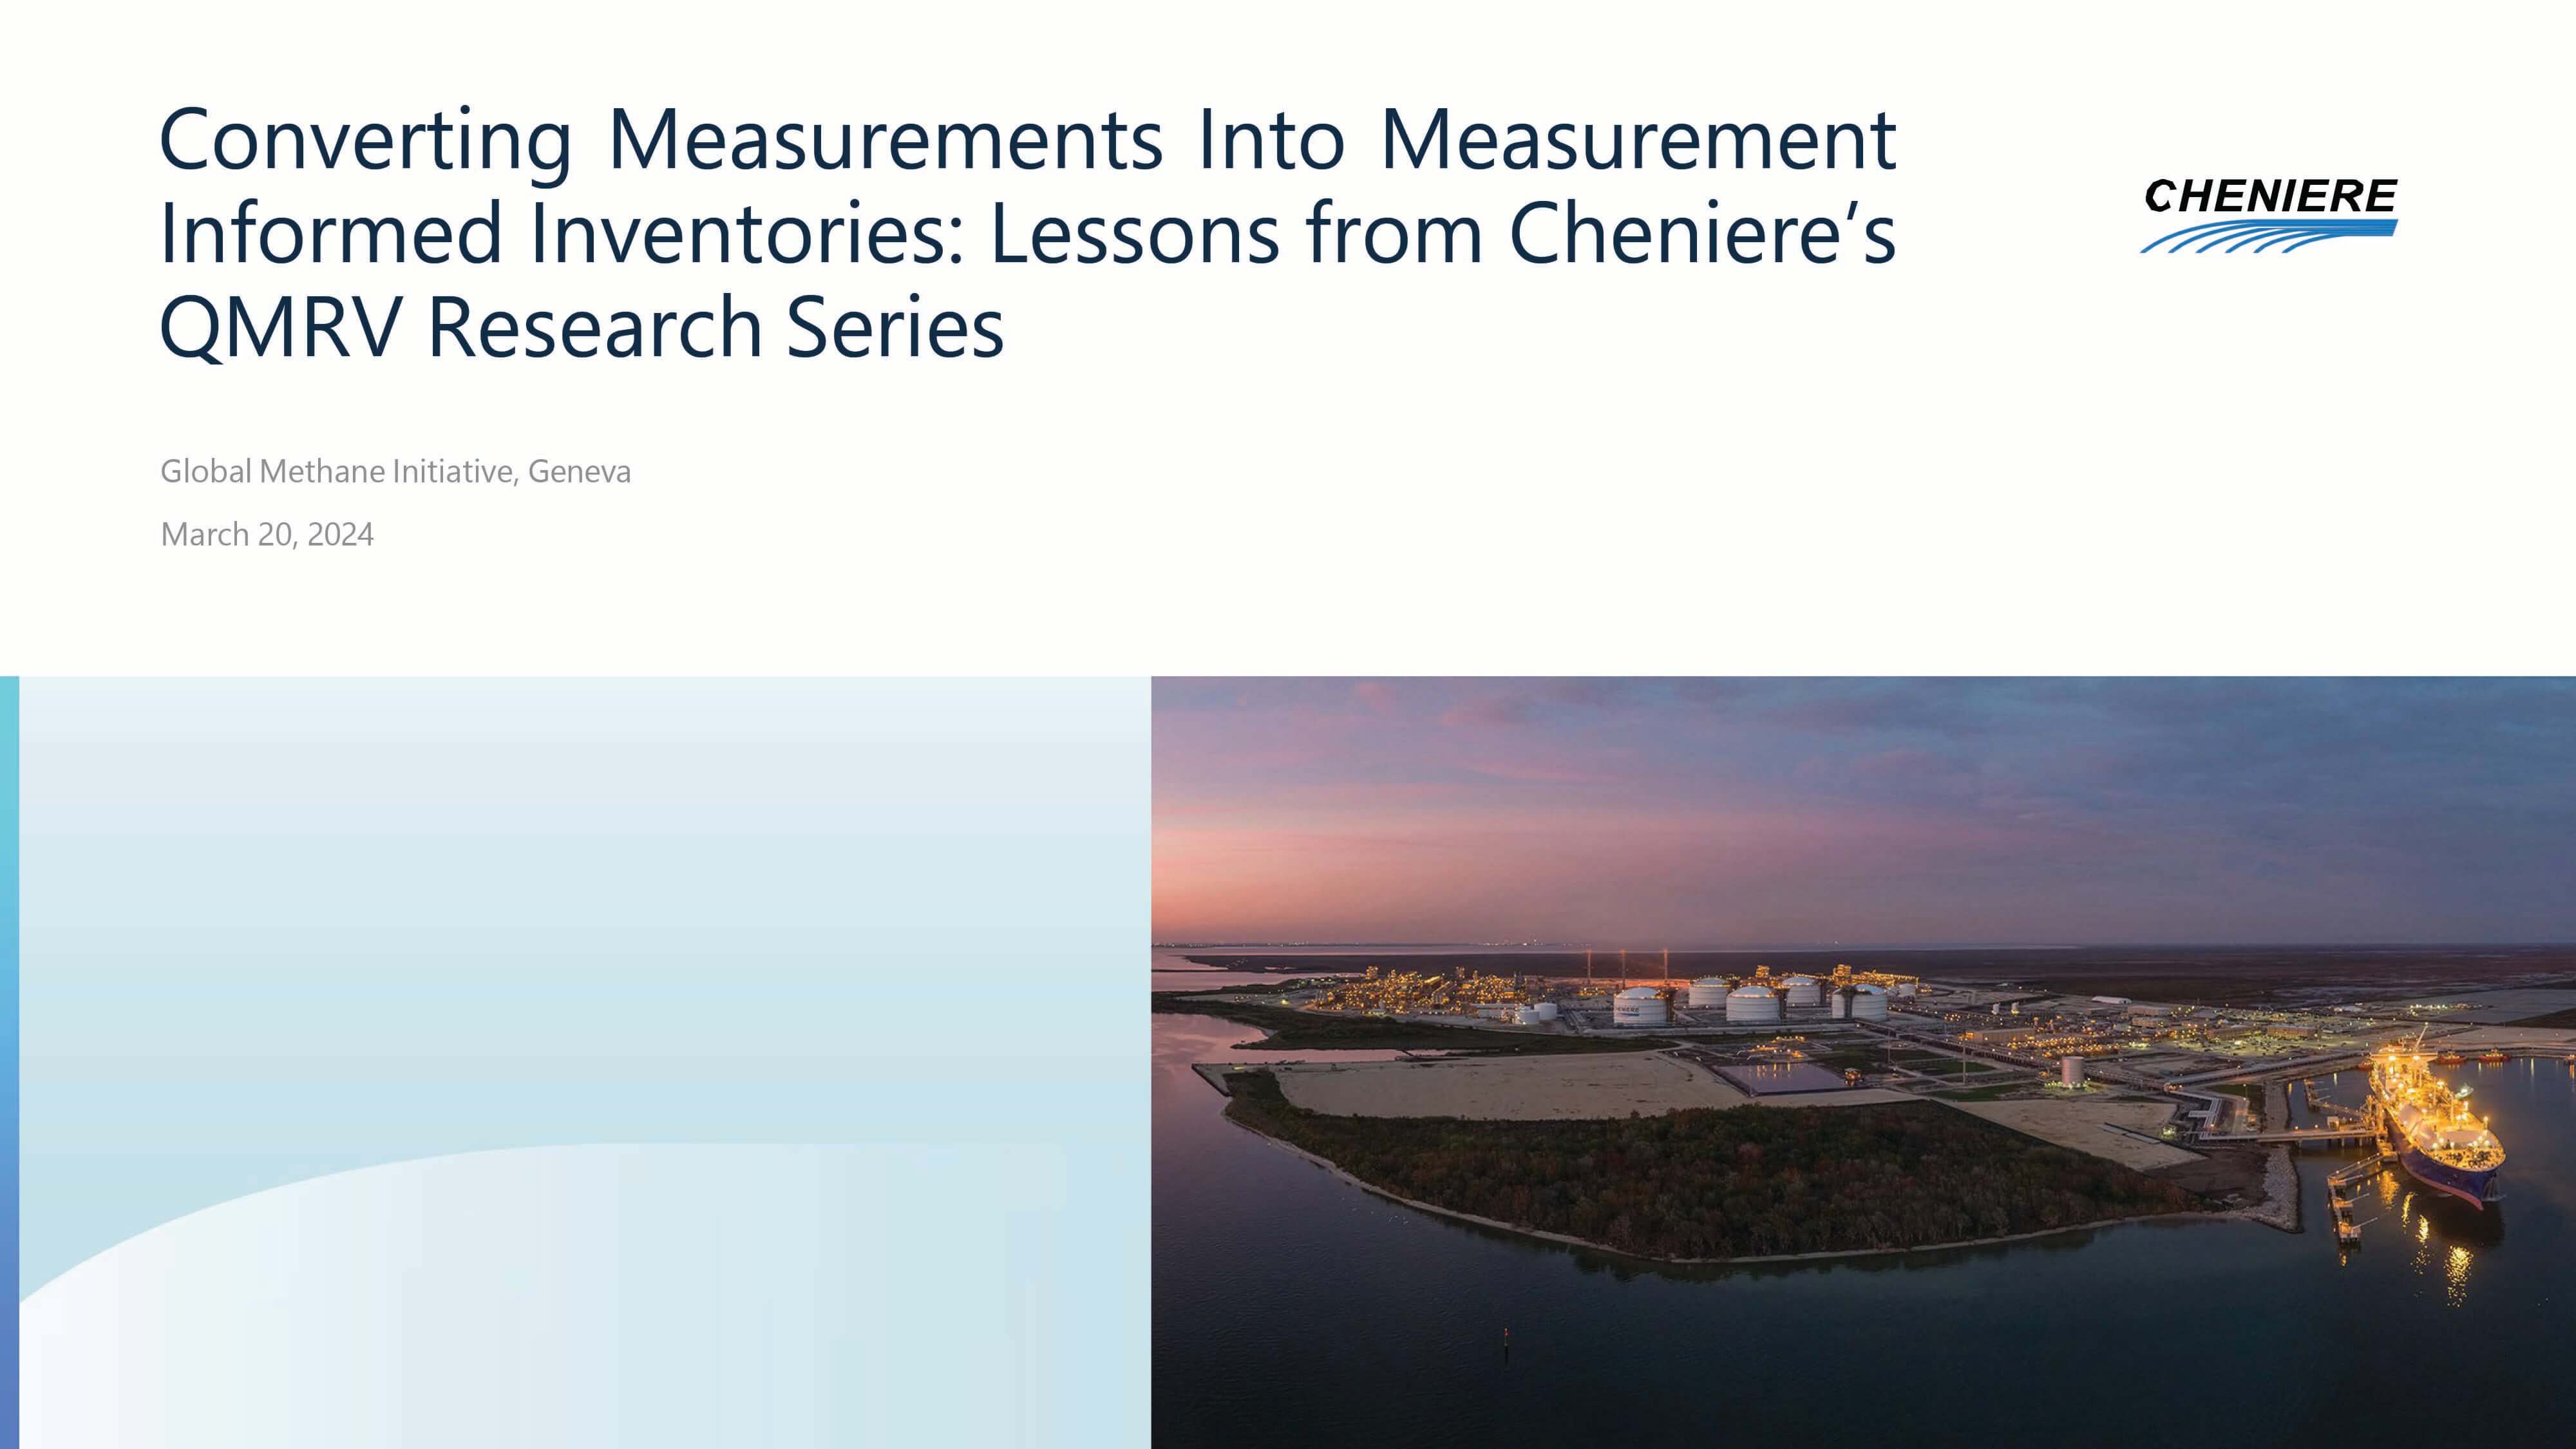 Converting Measurements Into Measurement Informed Inventories: Lessons from Cheniere's QMRV Research Series